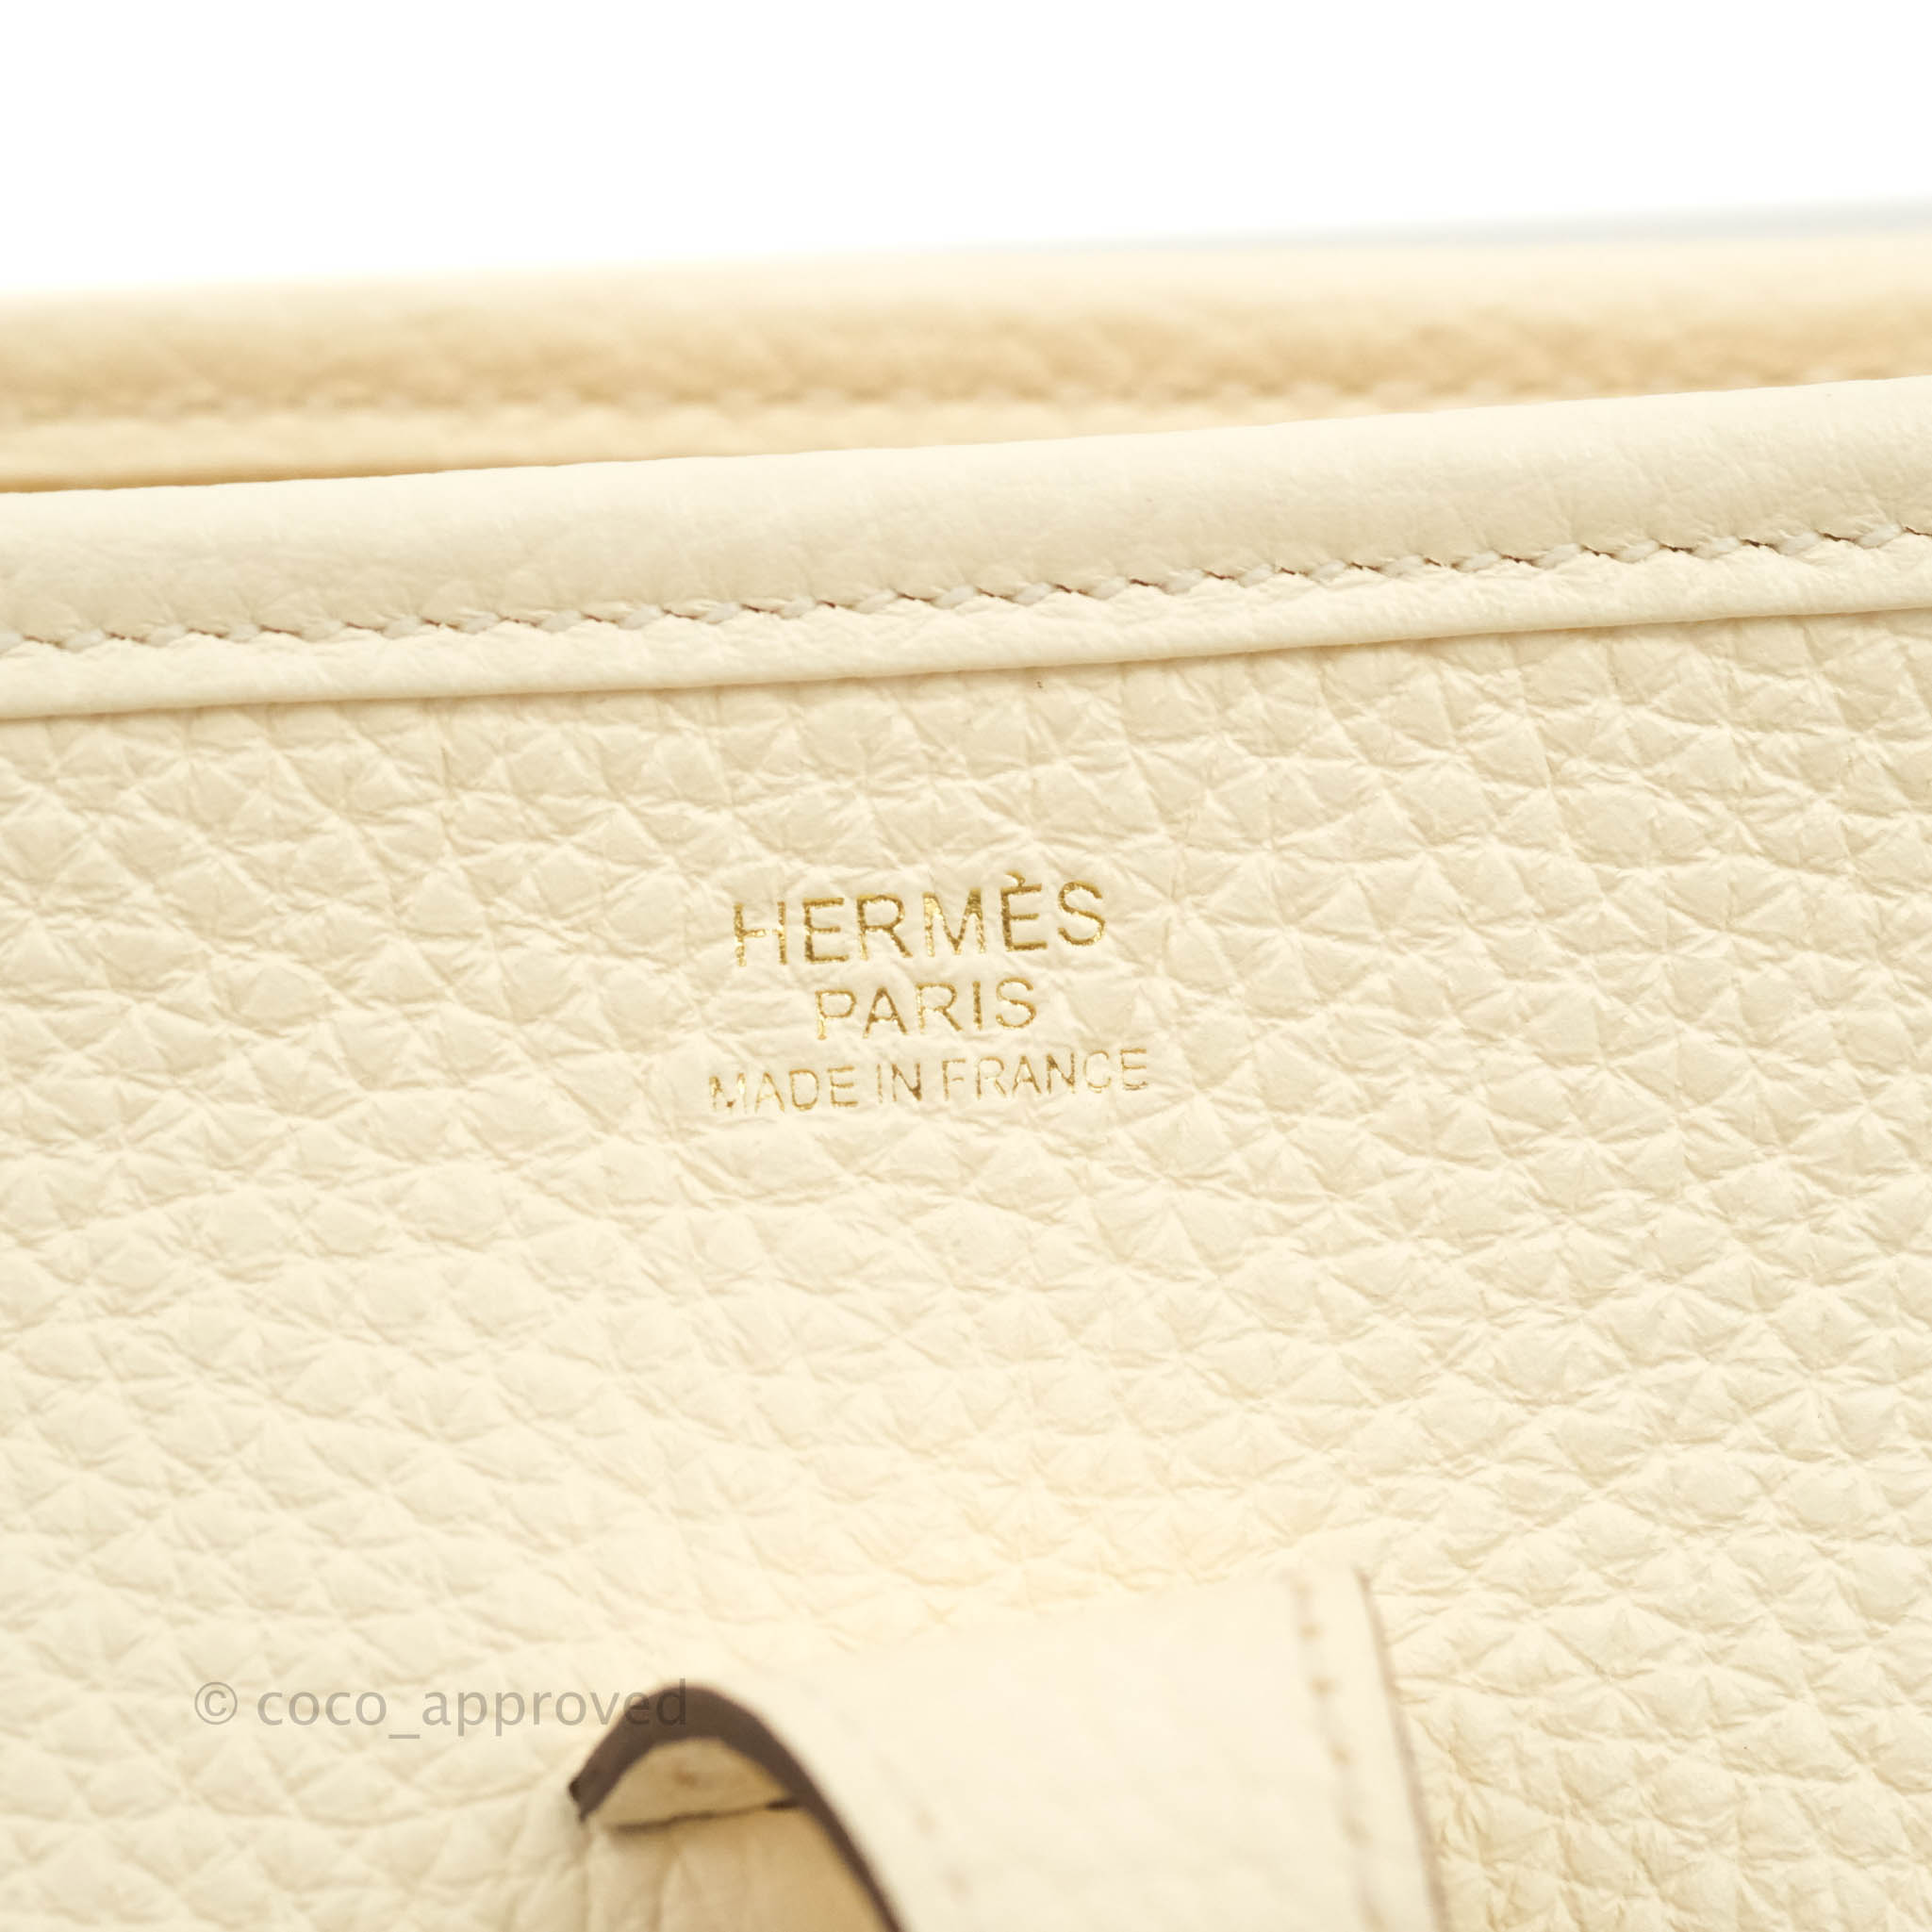 Hermes Evelyne III 29 Black Clemence Gold Hardware – Coco Approved